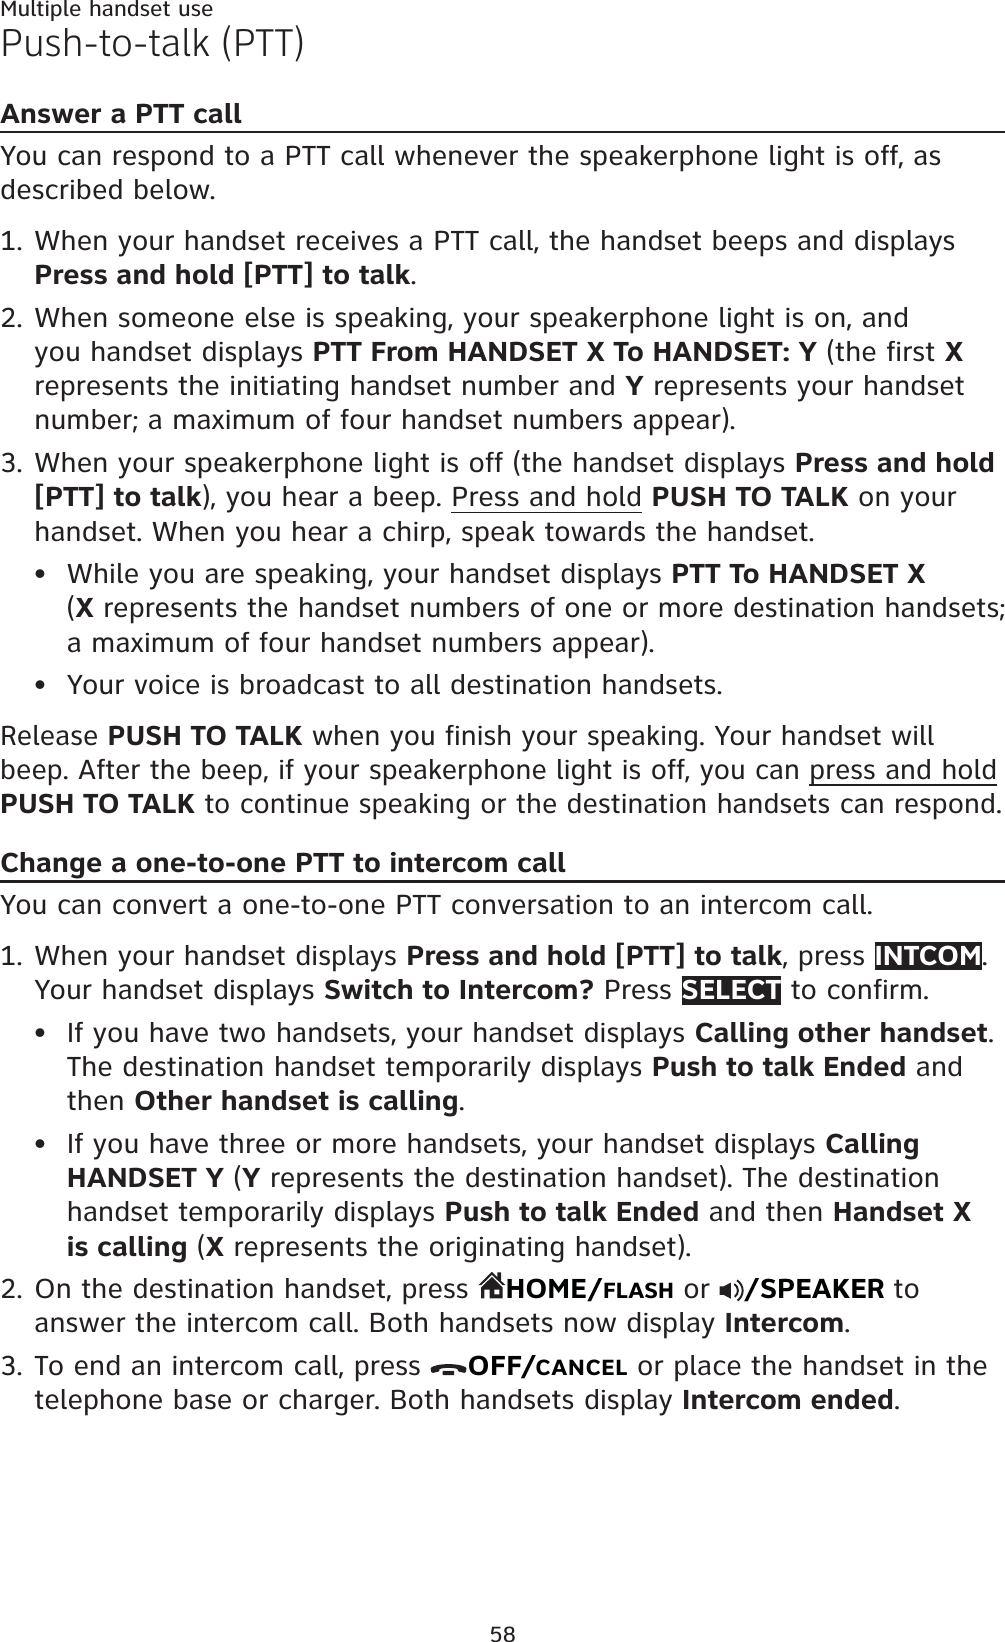 58Multiple handset usePush-to-talk (PTT)Answer a PTT callYou can respond to a PTT call whenever the speakerphone light is off, as described below.When your handset receives a PTT call, the handset beeps and displays Press and hold [PTT] to talk.When someone else is speaking, your speakerphone light is on, and you handset displays PTT From HANDSET X To HANDSET: Y (the first Xrepresents the initiating handset number and Y represents your handset number; a maximum of four handset numbers appear).When your speakerphone light is off (the handset displays Press and hold [PTT] to talk), you hear a beep. Press and hold PUSH TO TALK on your handset. When you hear a chirp, speak towards the handset.While you are speaking, your handset displays PTT To HANDSET X(X represents the handset numbers of one or more destination handsets; a maximum of four handset numbers appear).Your voice is broadcast to all destination handsets.Release PUSH TO TALK when you finish your speaking. Your handset will beep. After the beep, if your speakerphone light is off, you can press and holdPUSH TO TALK to continue speaking or the destination handsets can respond.Change a one-to-one PTT to intercom callYou can convert a one-to-one PTT conversation to an intercom call.When your handset displays Press and hold [PTT] to talk, press INTCOM.Your handset displays Switch to Intercom? Press SELECT to confirm.If you have two handsets, your handset displays Calling other handset.The destination handset temporarily displays Push to talk Ended and then Other handset is calling.If you have three or more handsets, your handset displays CallingHANDSET Y (Y represents the destination handset). The destination handset temporarily displays Push to talk Ended and then Handset X is calling (X represents the originating handset).On the destination handset, press  HOME/FLASH or  /SPEAKER to answer the intercom call. Both handsets now display Intercom.To end an intercom call, press  OFF/CANCEL or place the handset in the telephone base or charger. Both handsets display Intercom ended.1.2.3.••1.••2.3.